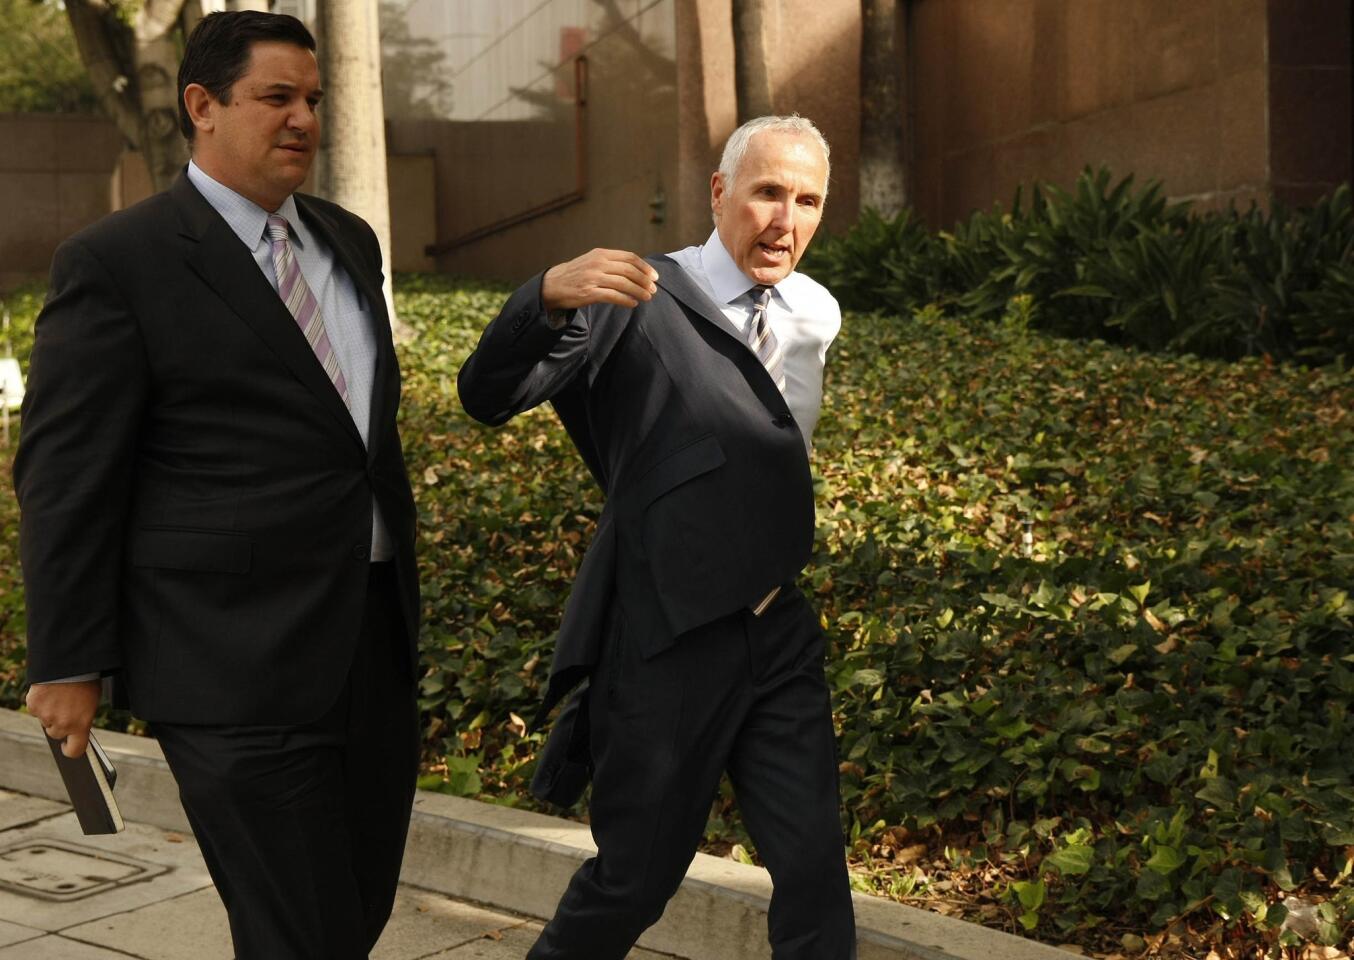 Former Dodgers owner Frank McCourt, right, on June 13 walks into Los Angeles County Superior Court, where he testified in Bryan Stow's lawsuit against the Dodgers.